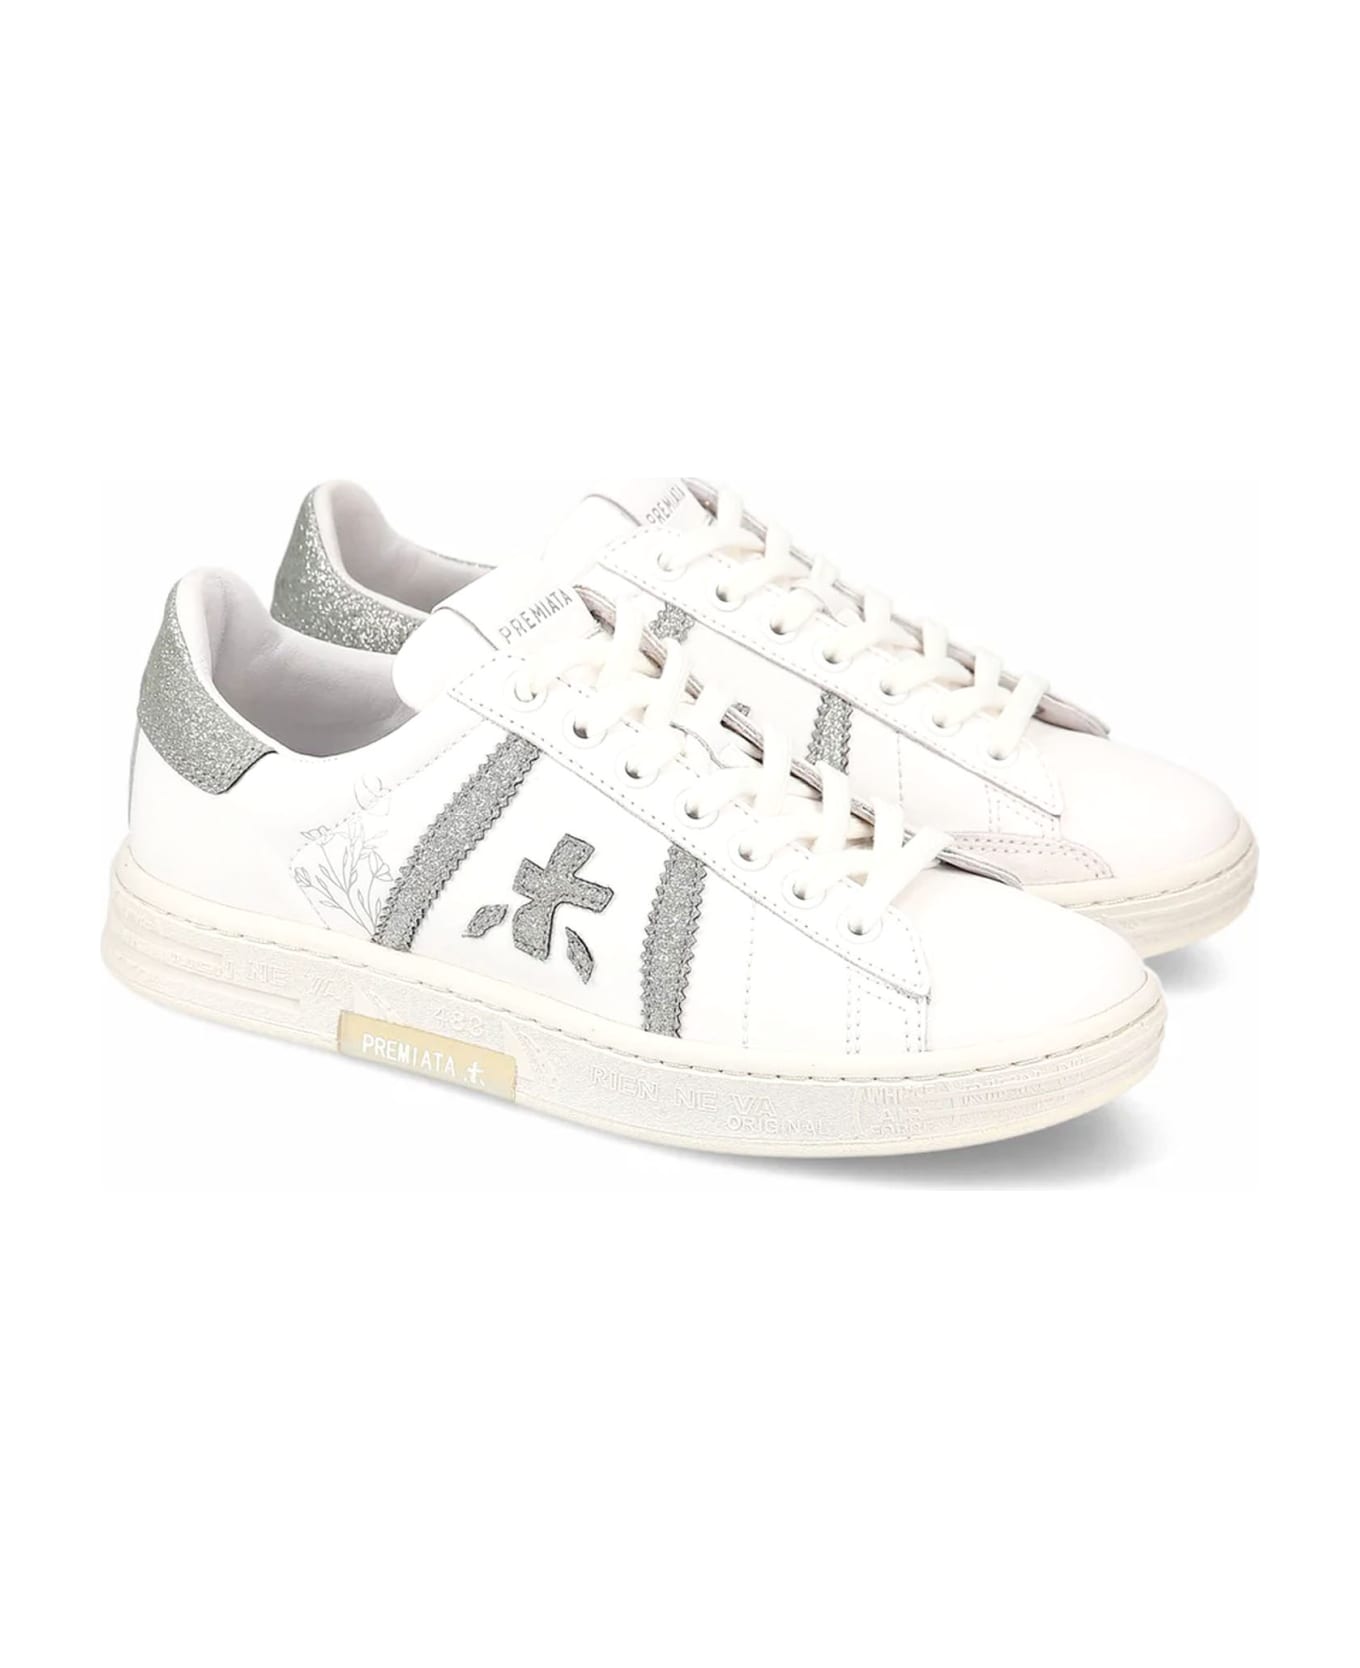 Premiata Russell Sneakers - white スニーカー